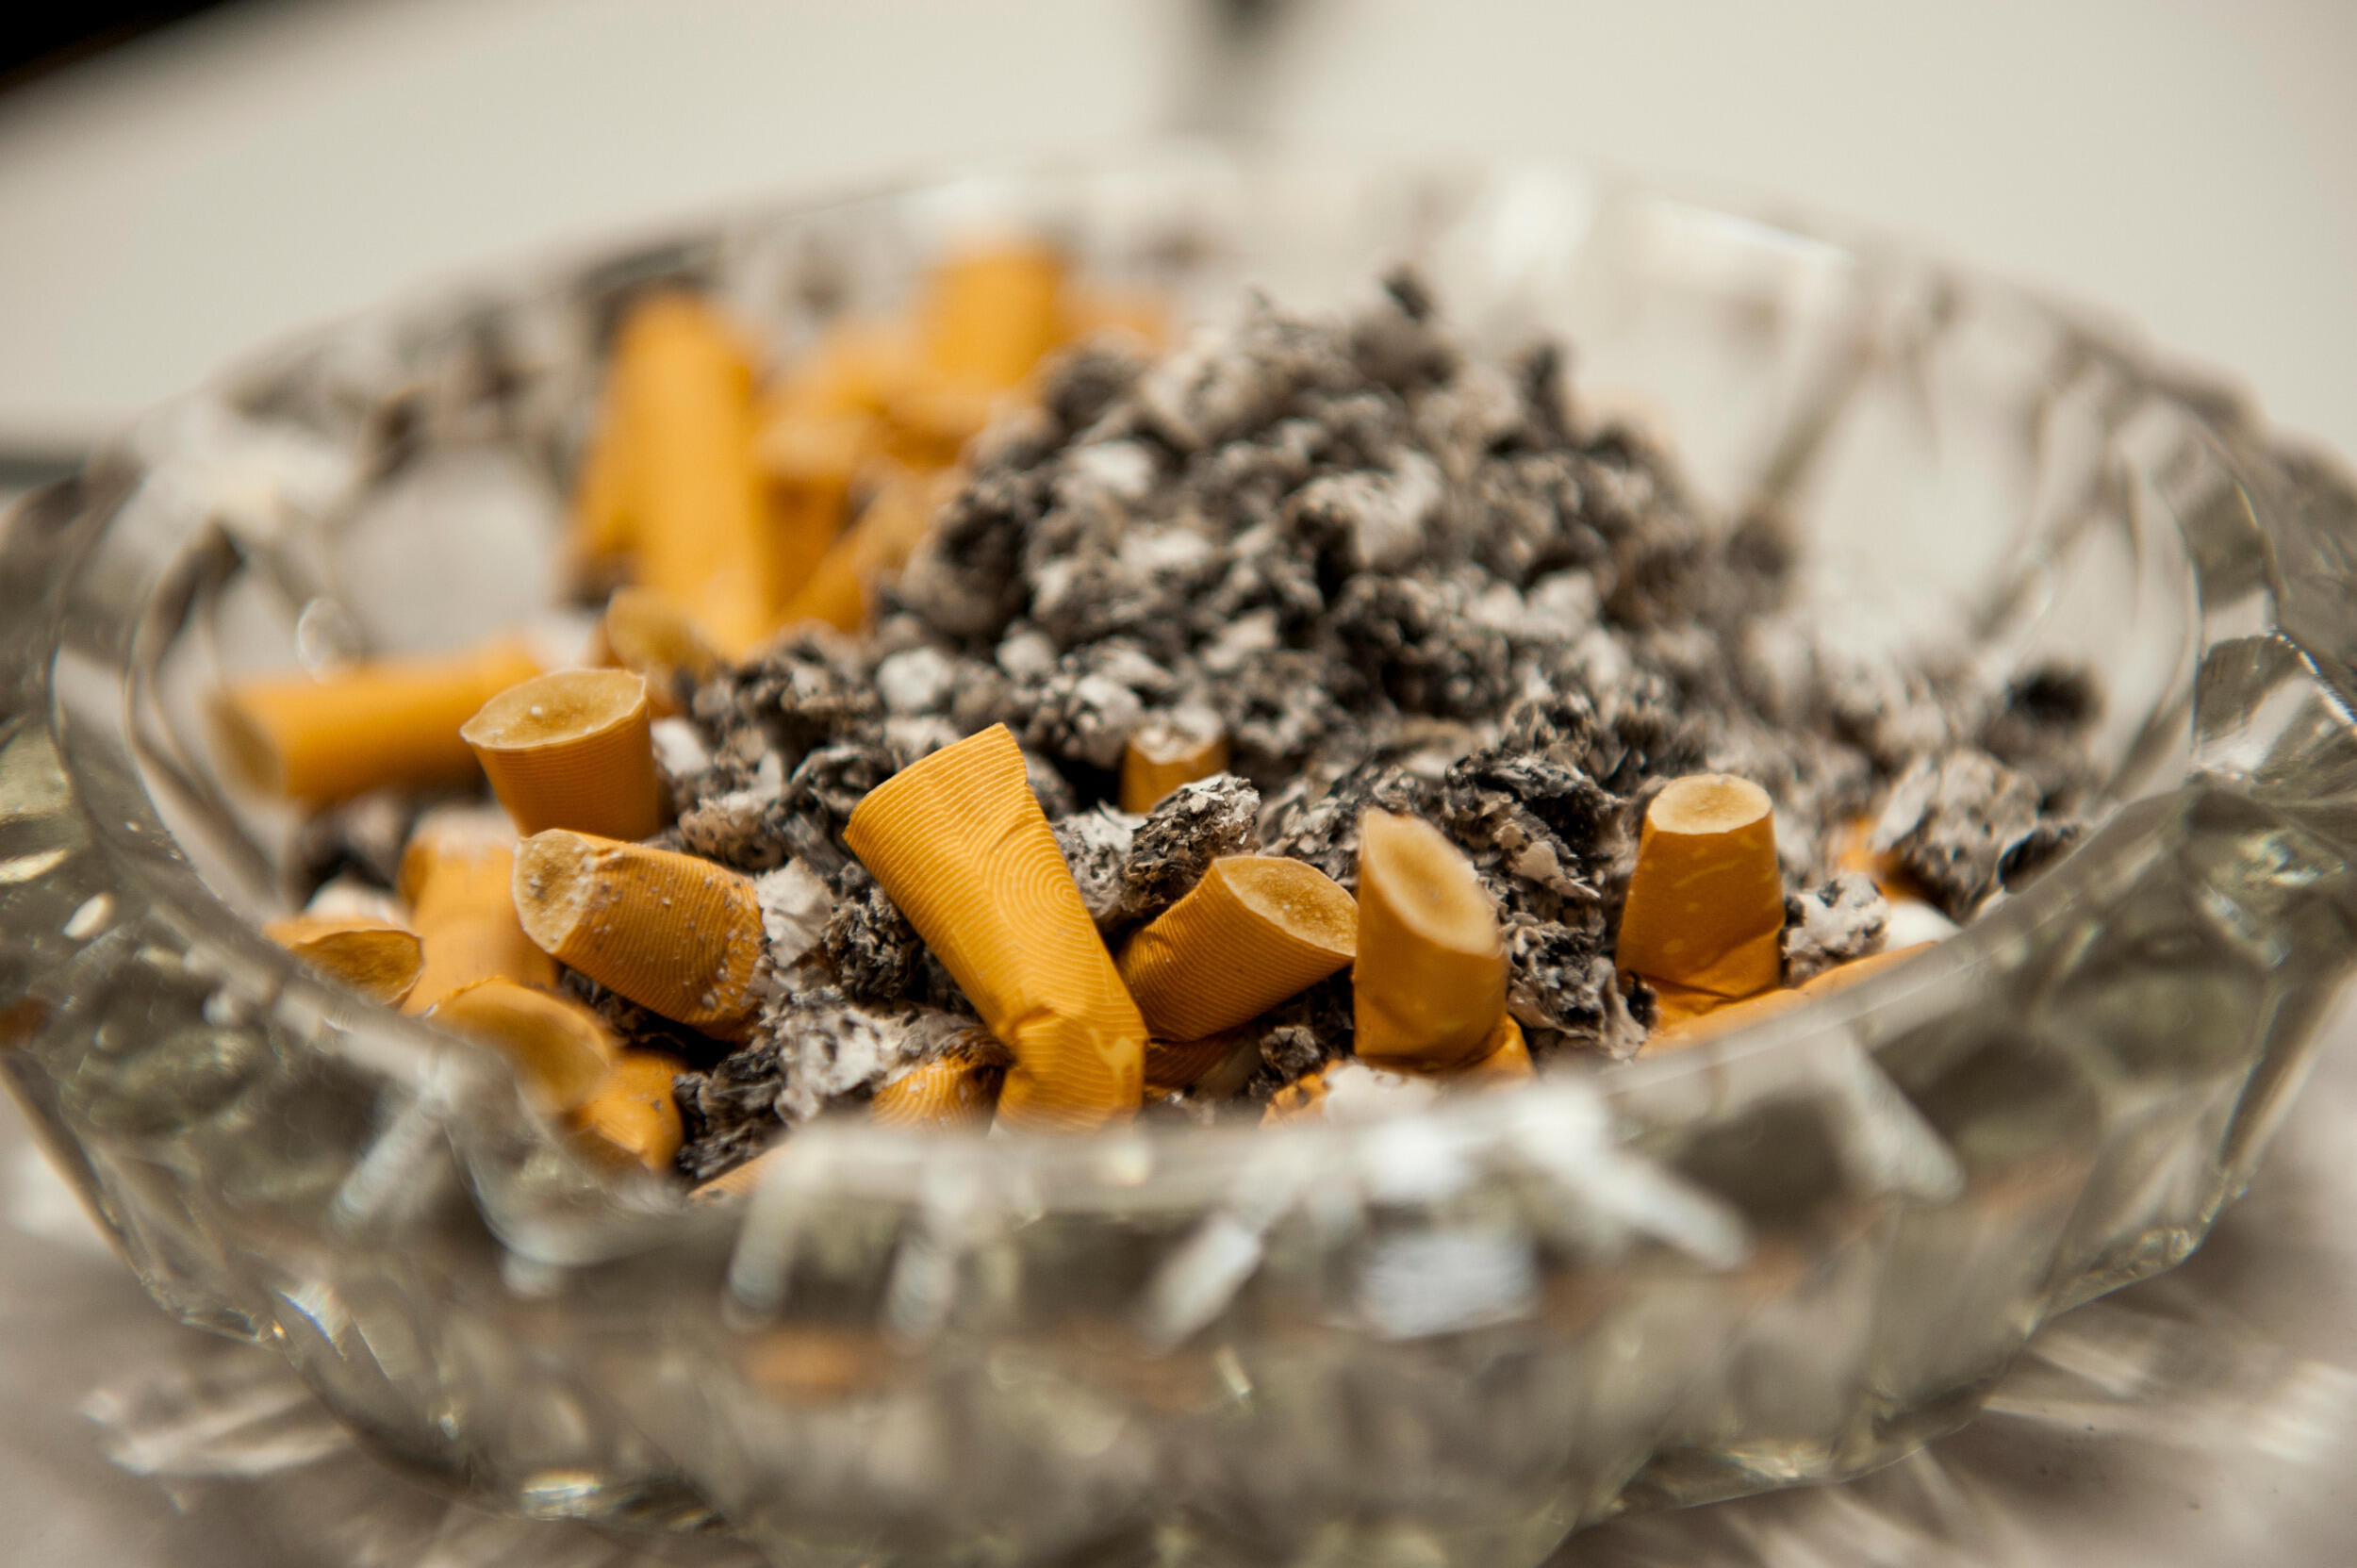 Close-up image of used cigarettes in an ashtray.